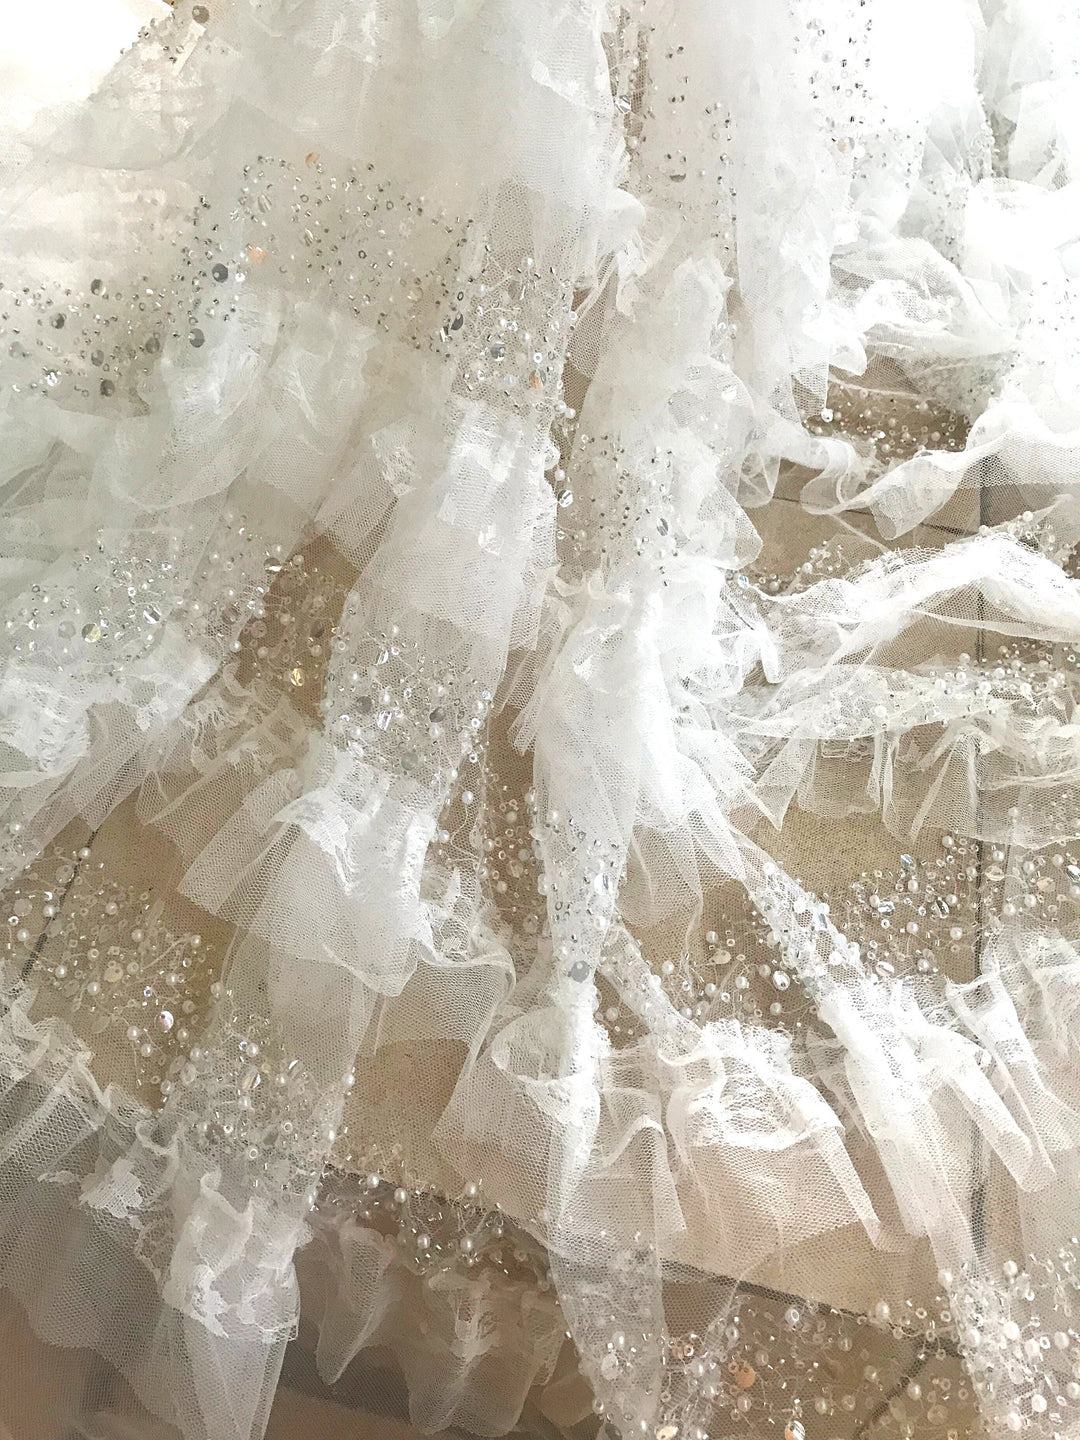 5 YARDS / White Beaded Embroidery Ruffled Mesh Tulle Lace / Party Prom Bridal Dress Fabric